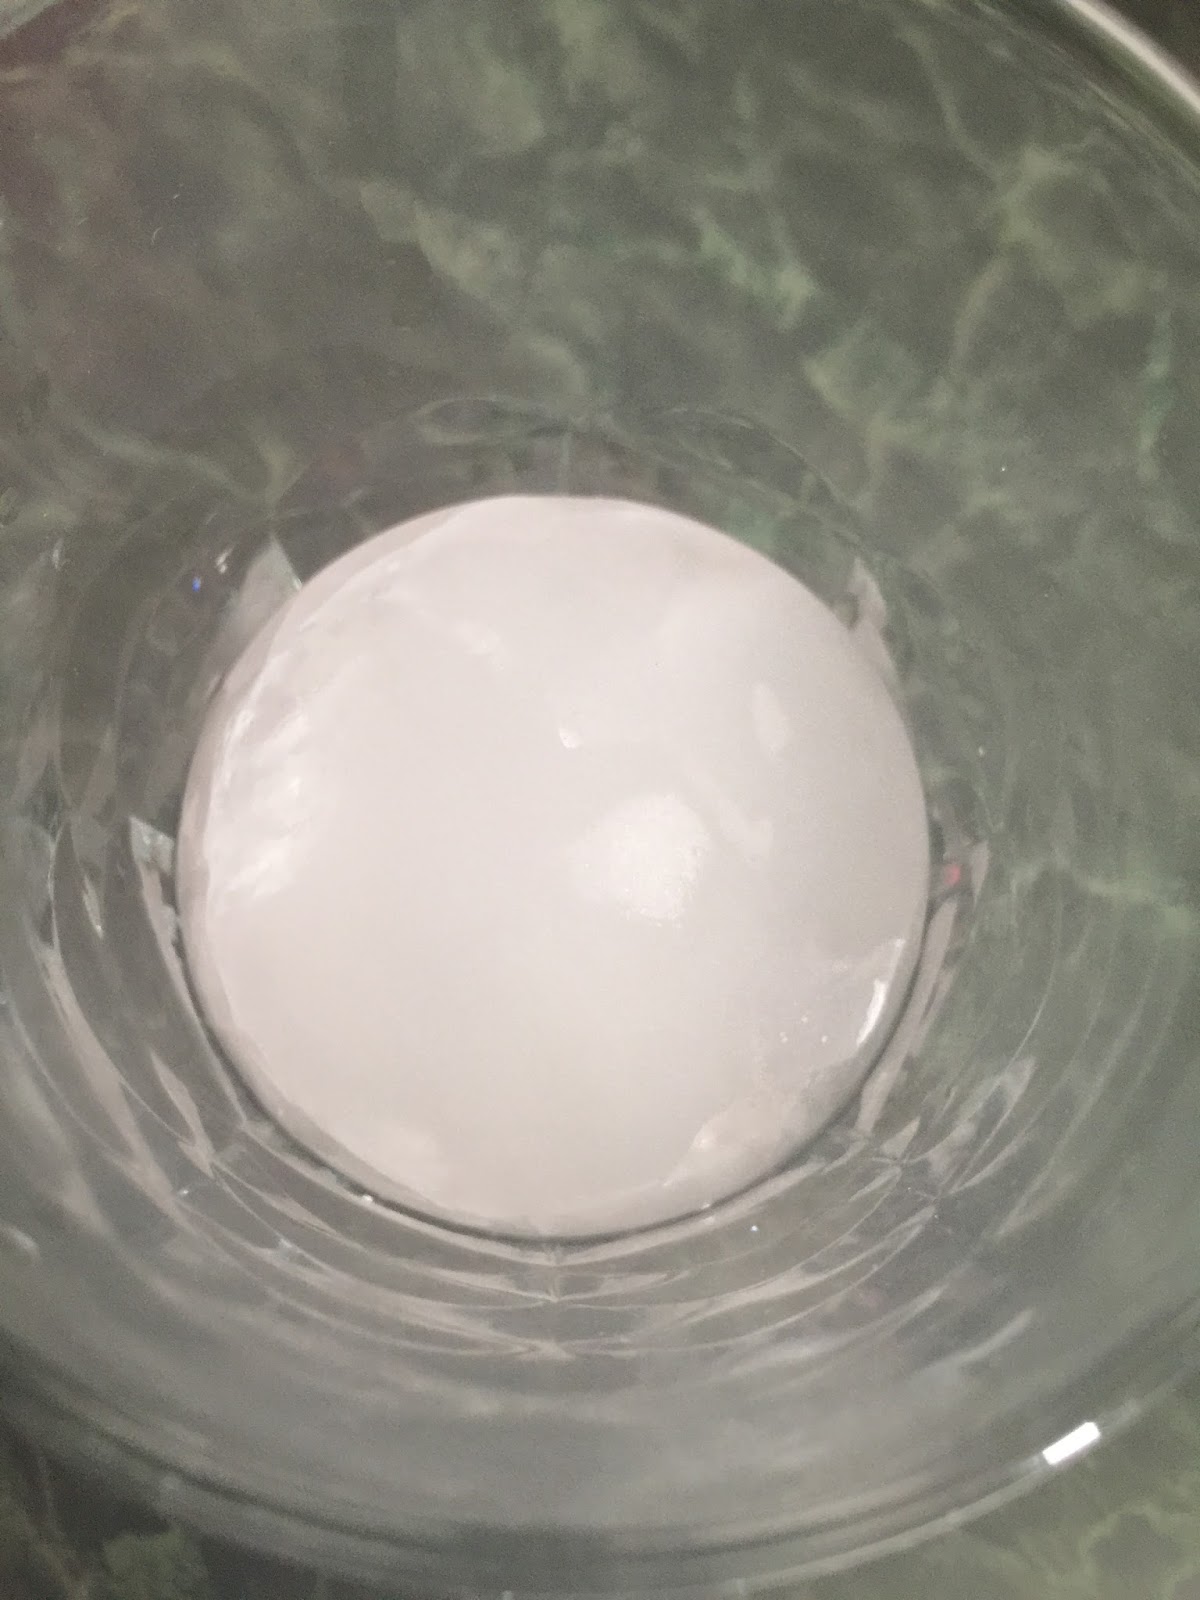 Ice ball mold review